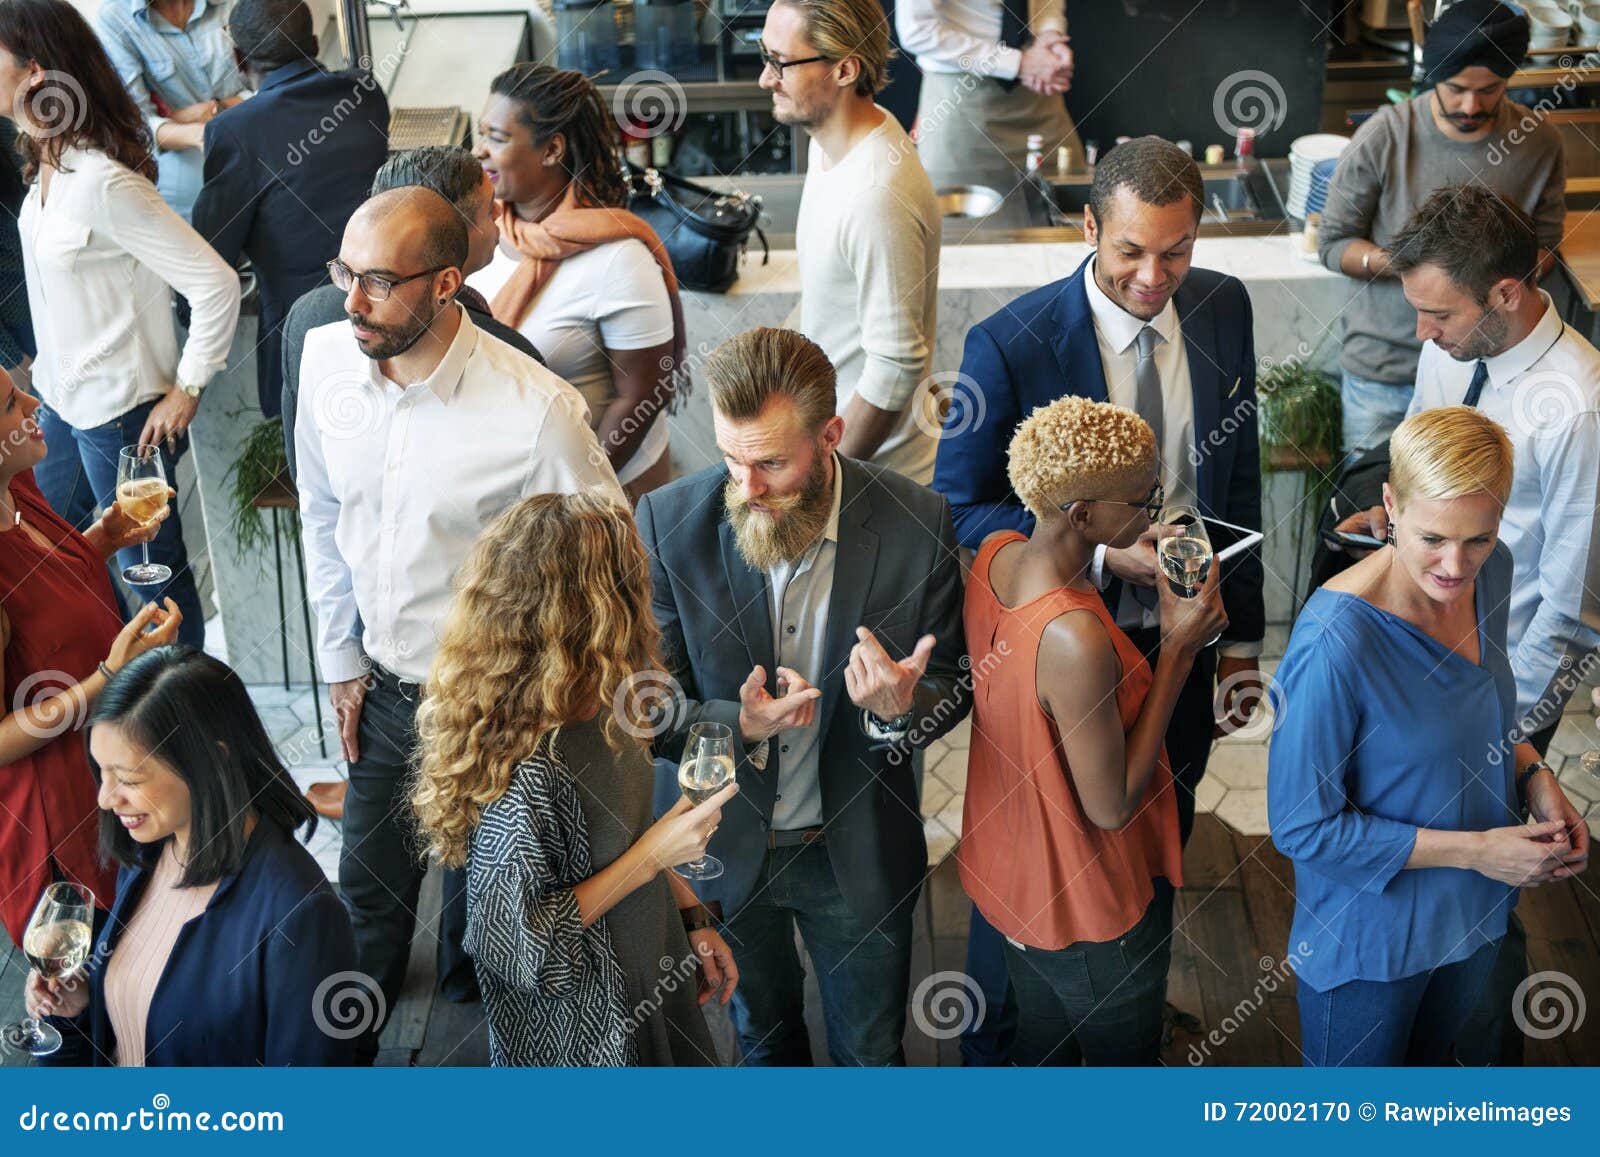 business people meeting eating discussion cuisine party concept